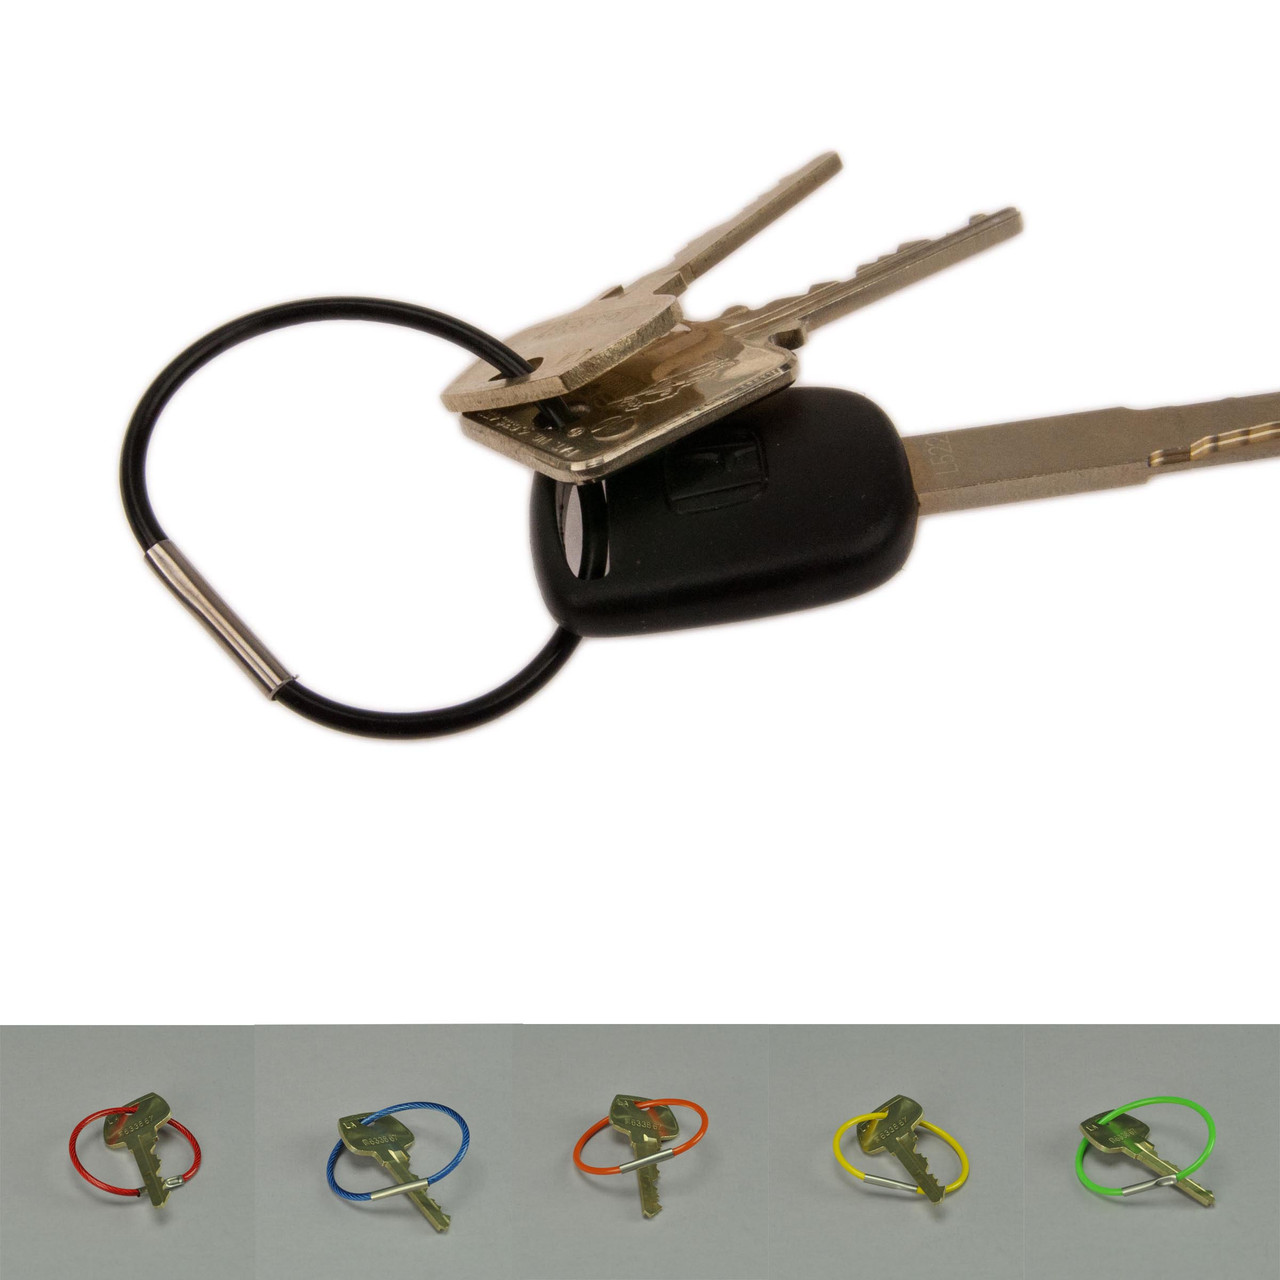 Shop for and Buy Threaded Locking 4 Inch Diameter Jumbo Keyring at